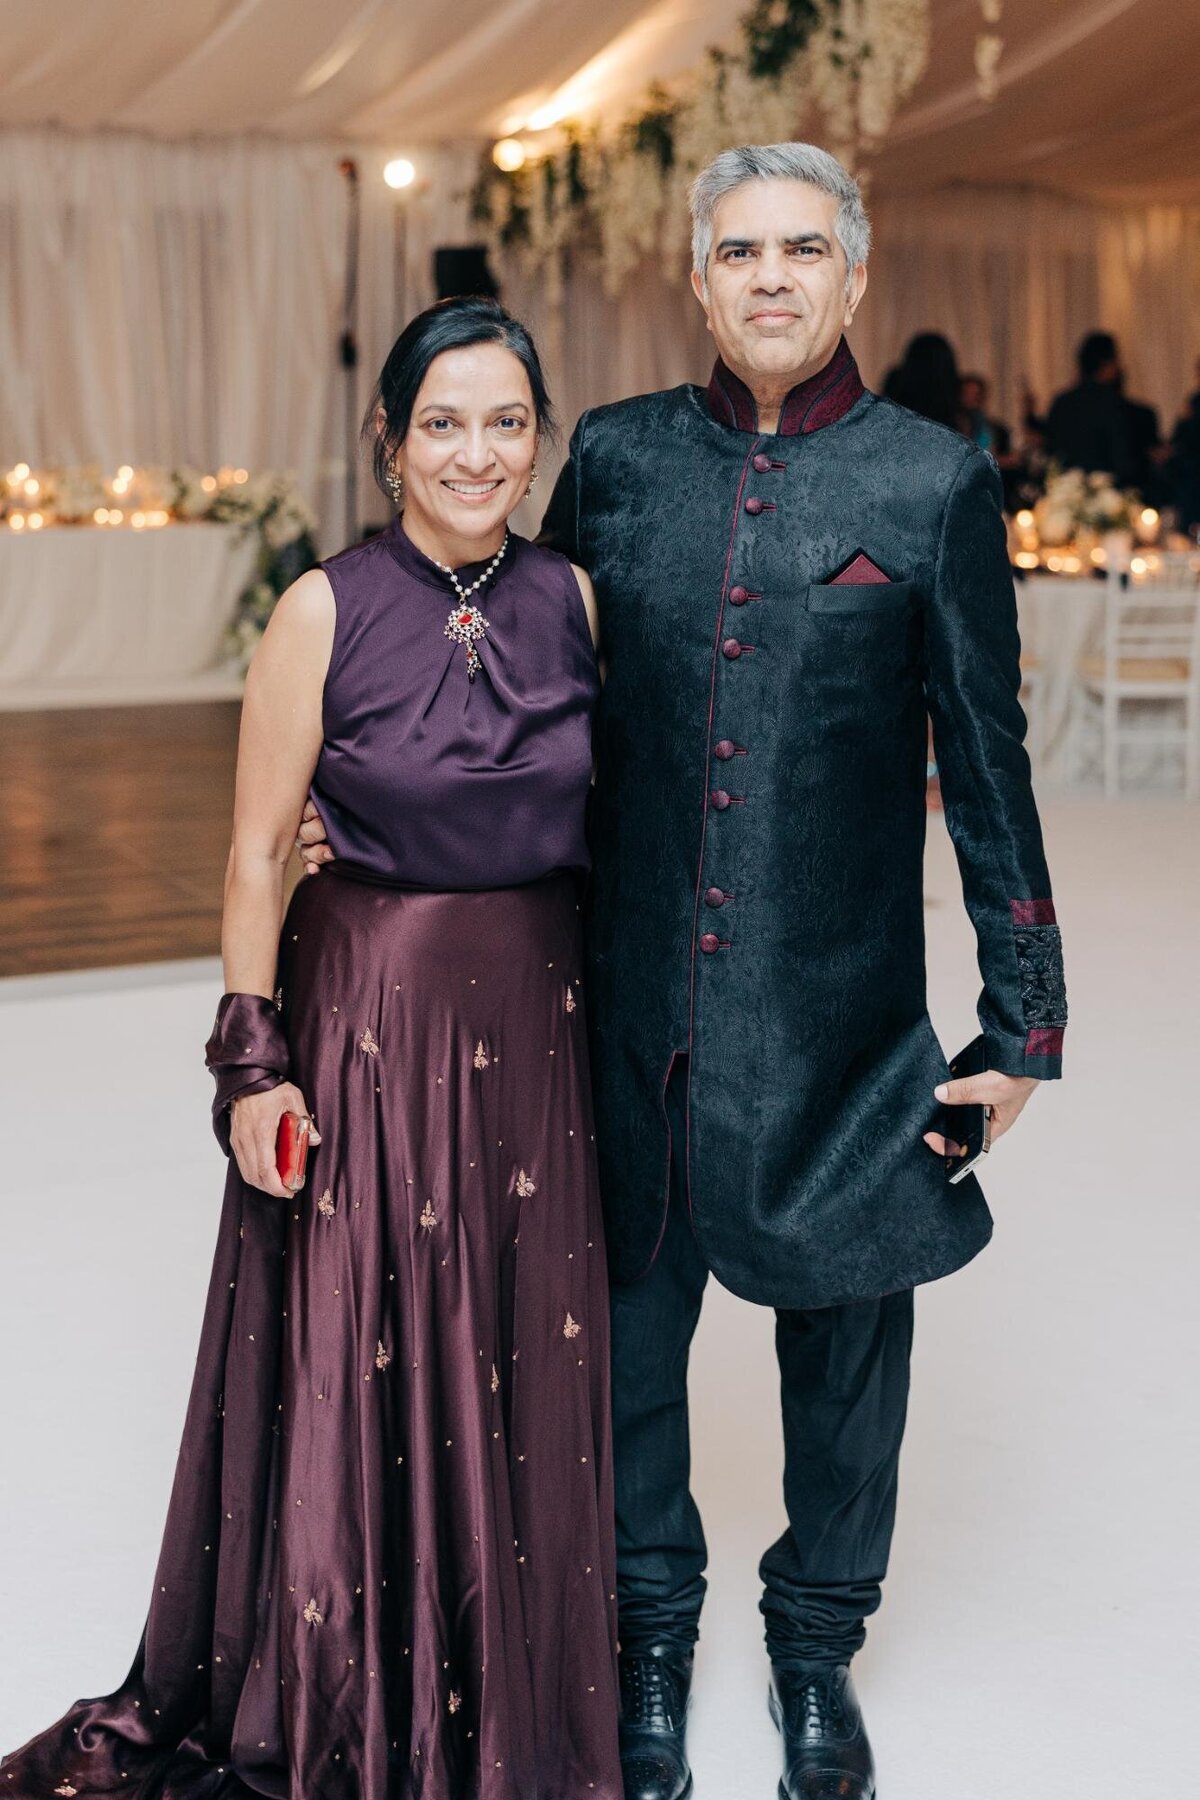 A couple in formal attire posing at an event; the woman in a purple gown and the man in a black traditional outfit with burgundy accents.